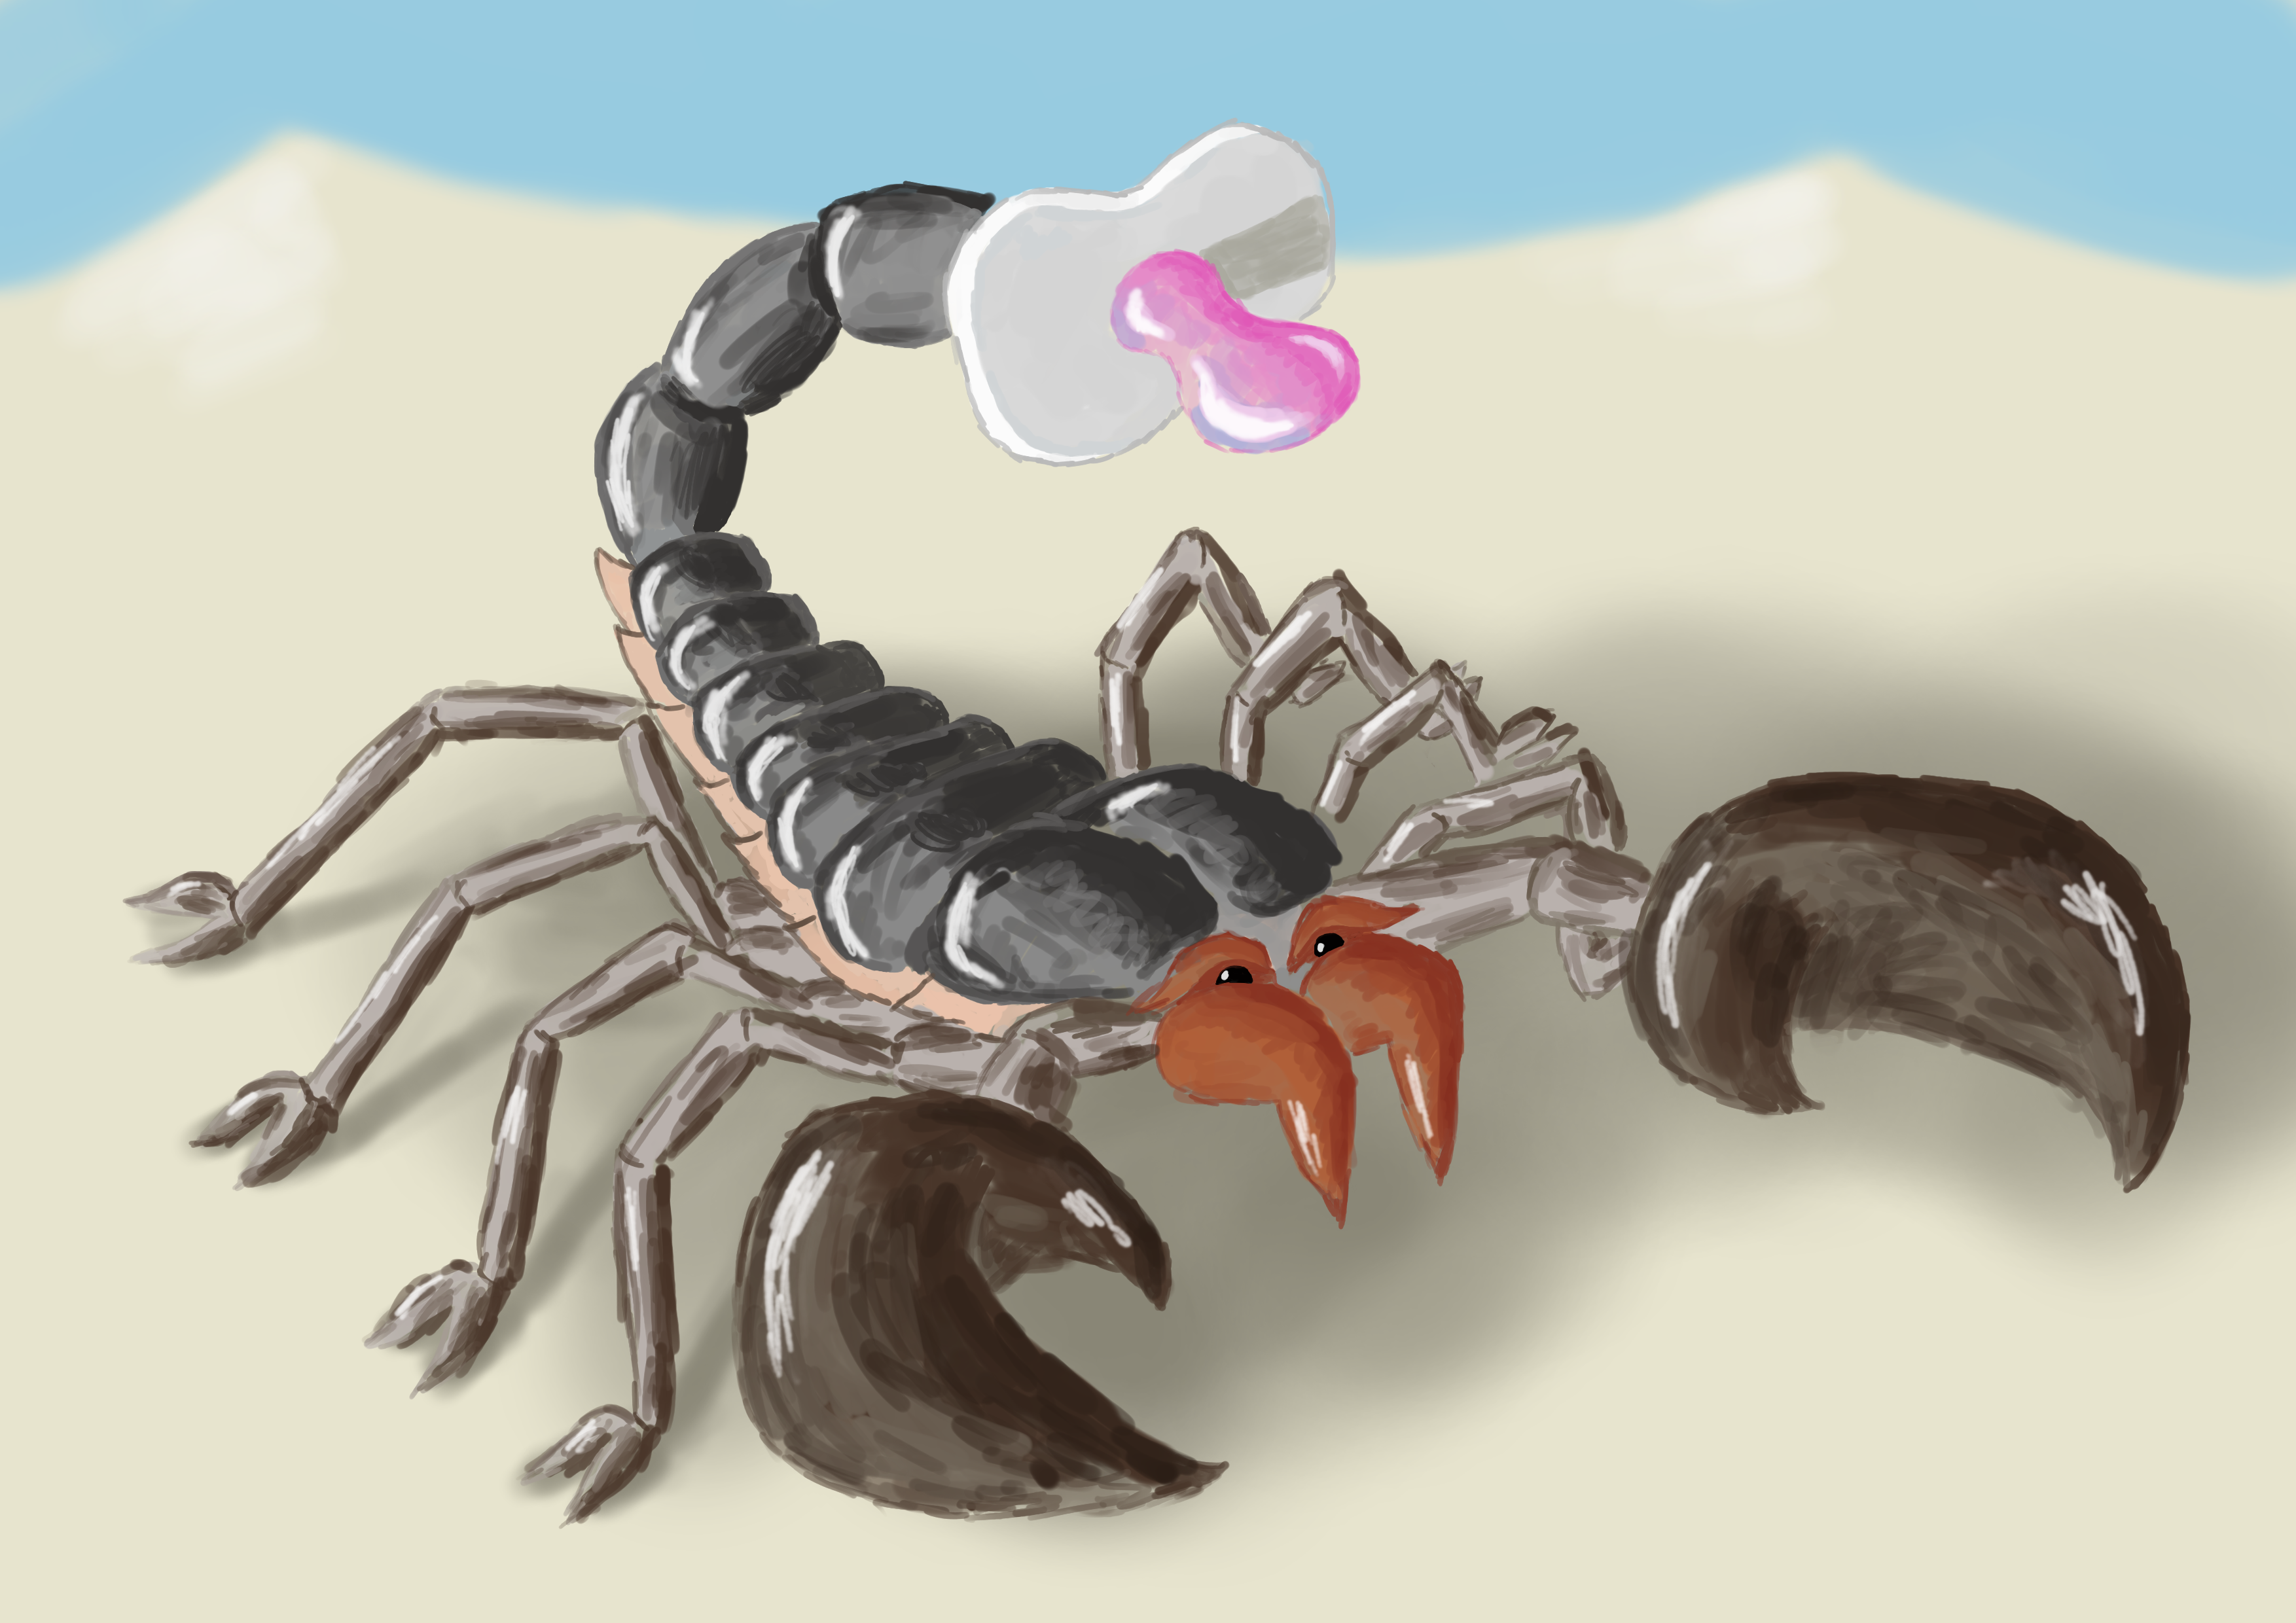 Scorpion with a pacifier instead of a stinger